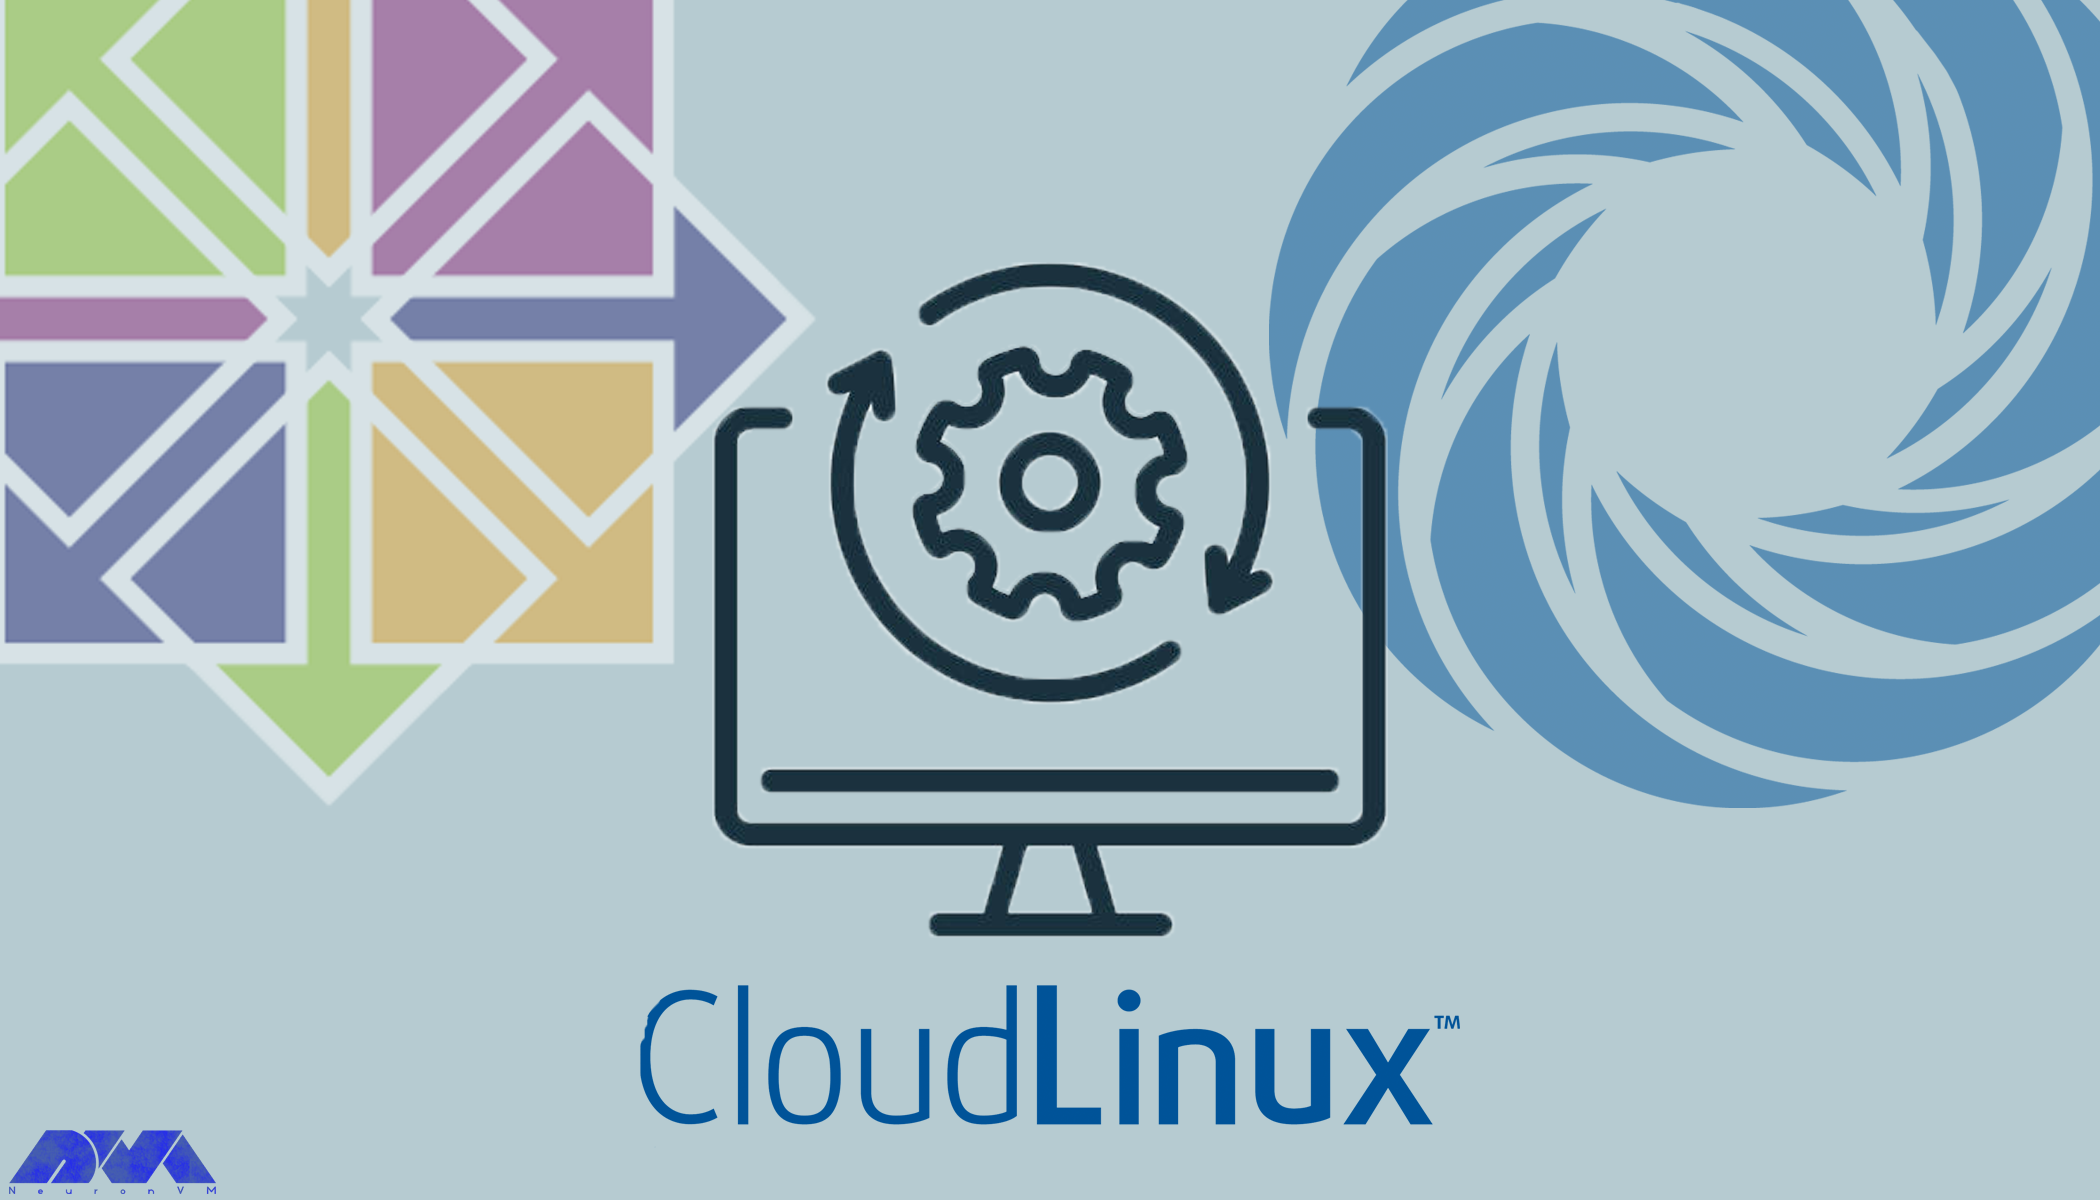 install cloudlinux on centos 7